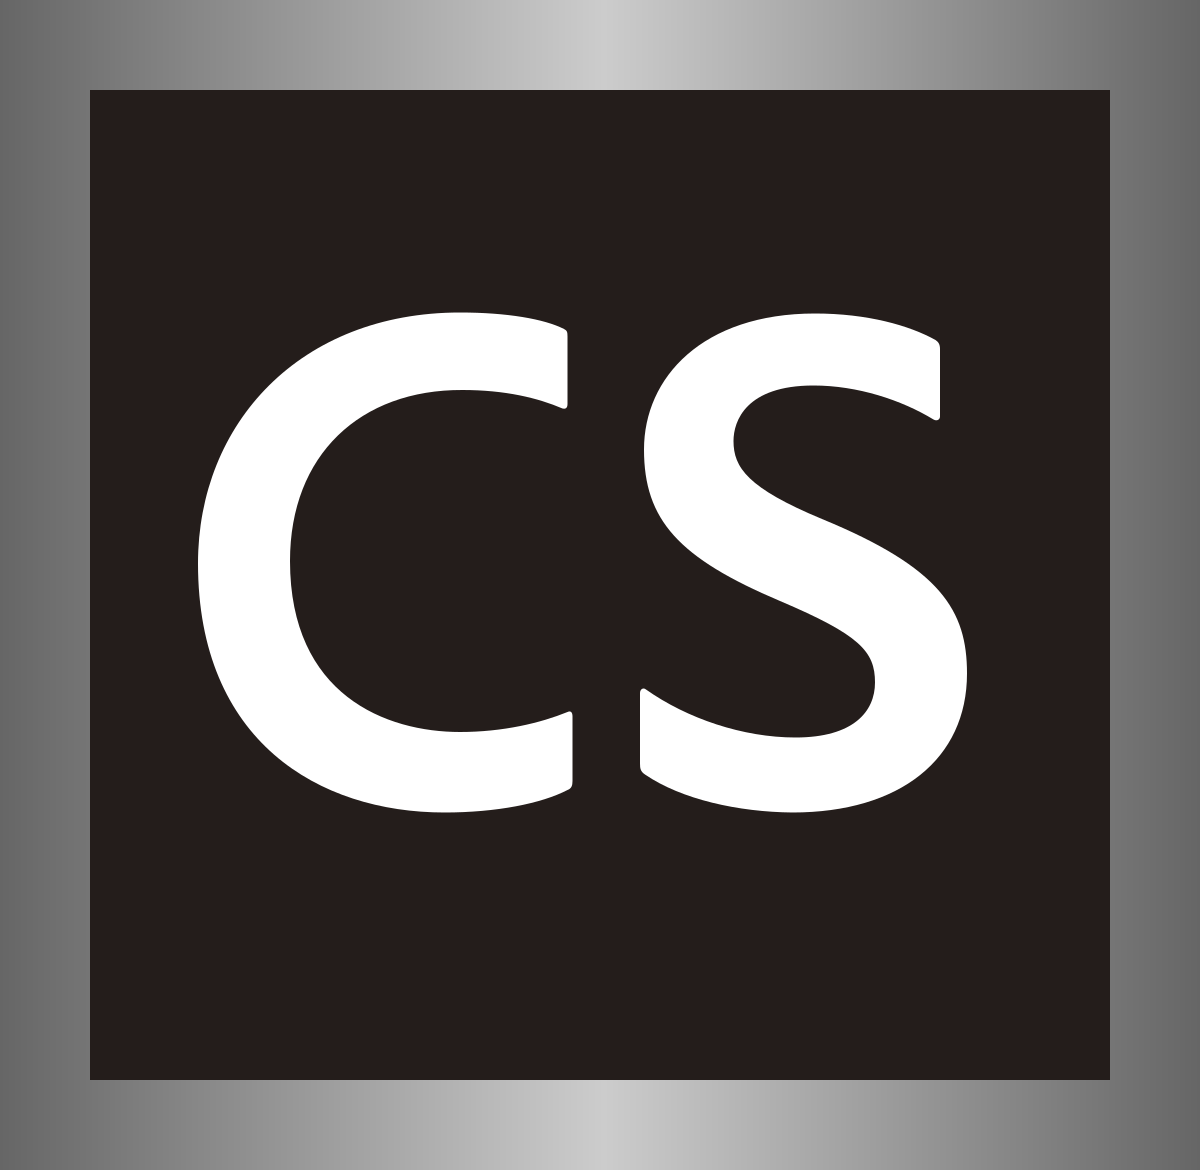 Adobe cs master collection for mac torrent